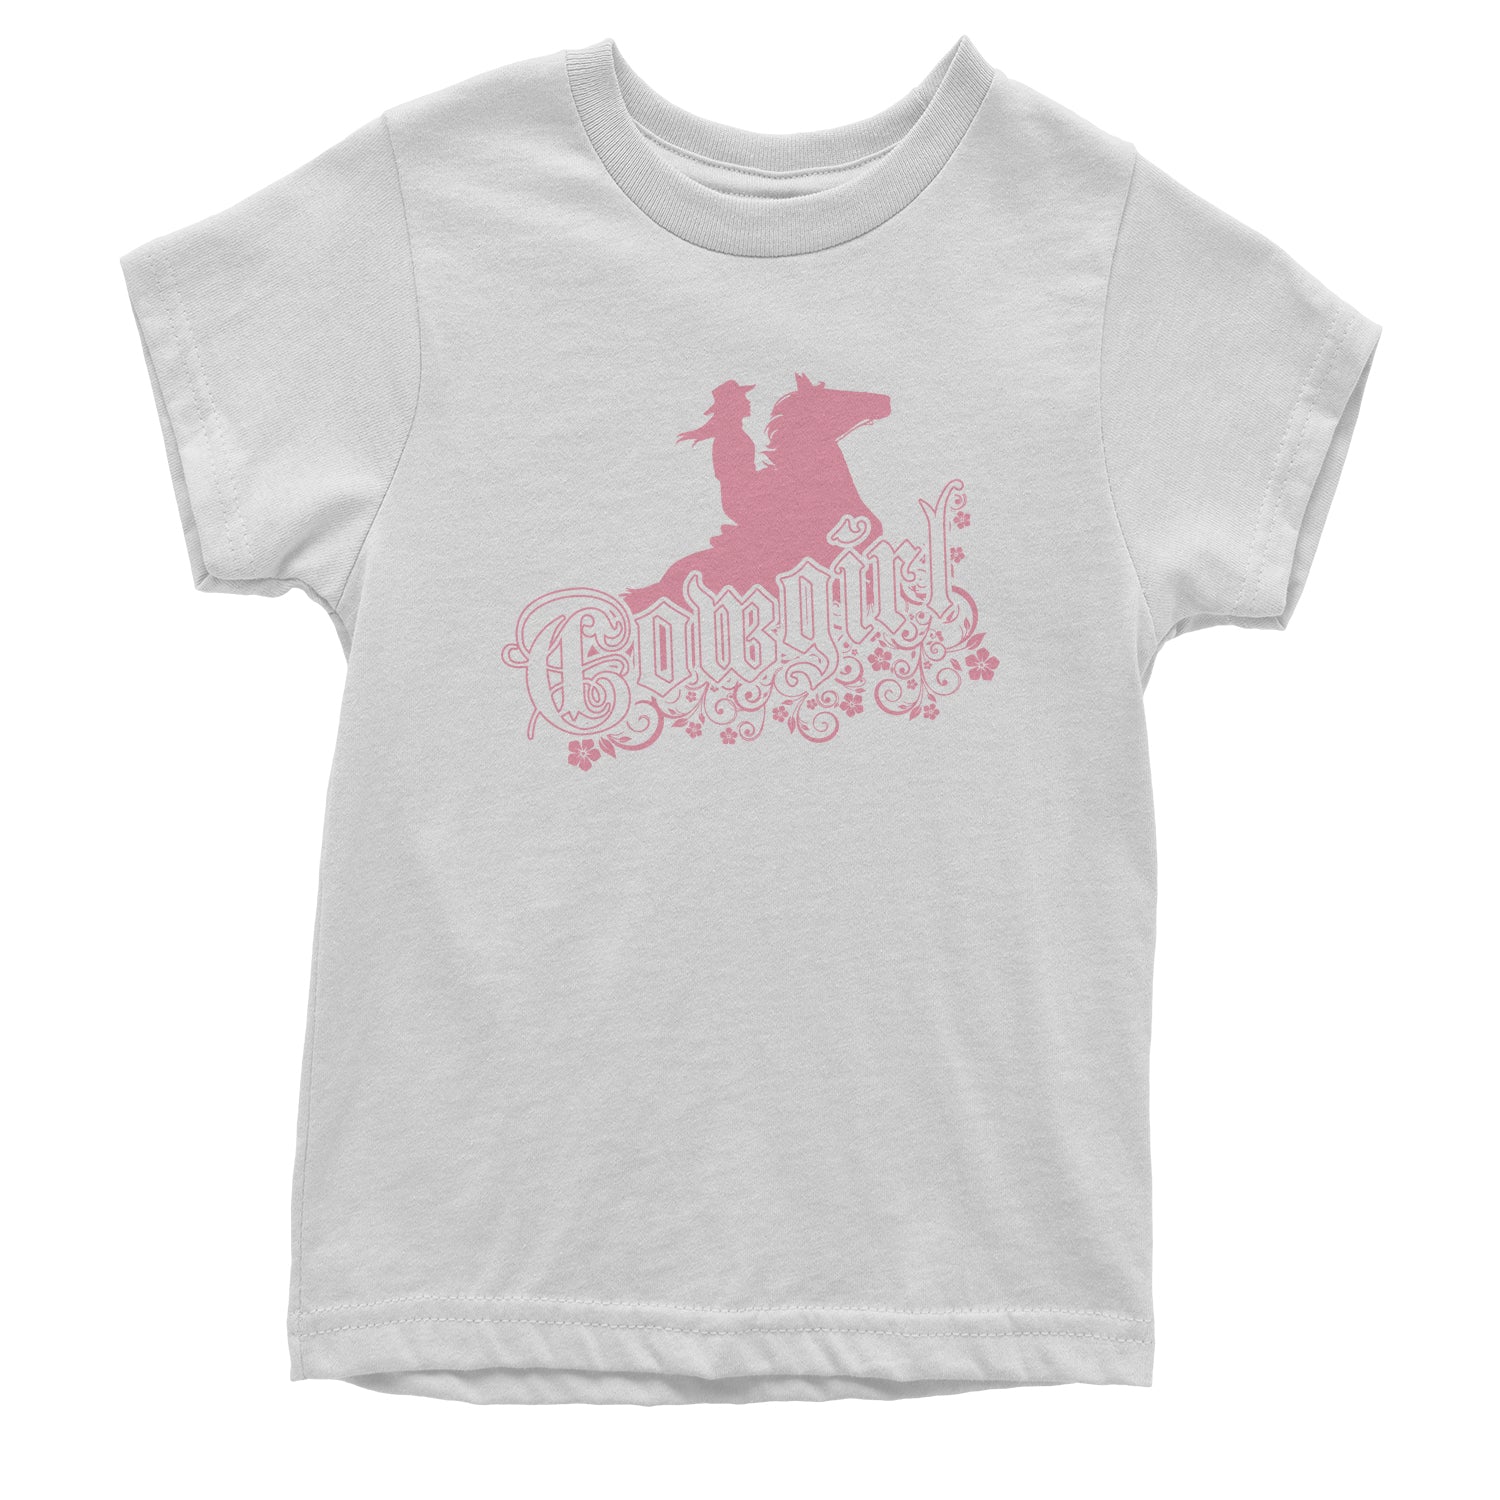 Cowgirl Riding A Horse Youth T-shirt country, daughter, farmers, girl, horses by Expression Tees